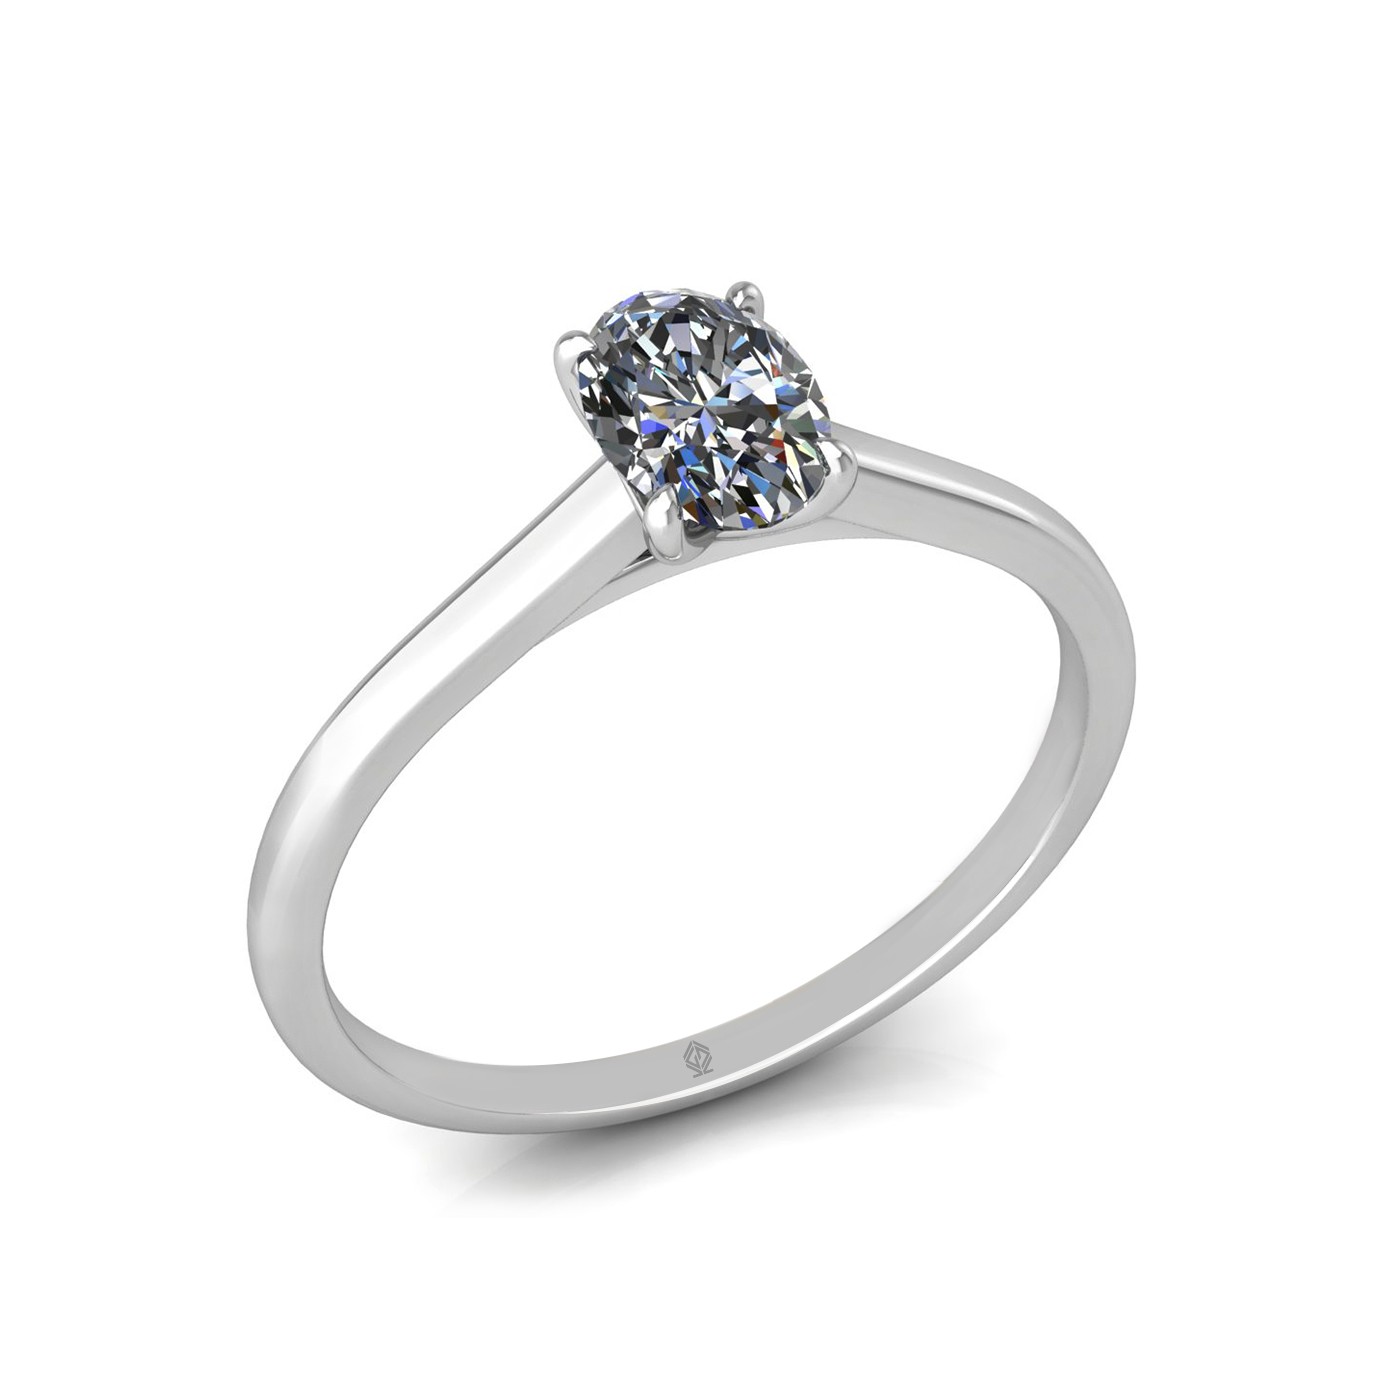 18k white gold  0,50 ct 4 prongs solitaire oval cut diamond engagement ring with whisper thin band